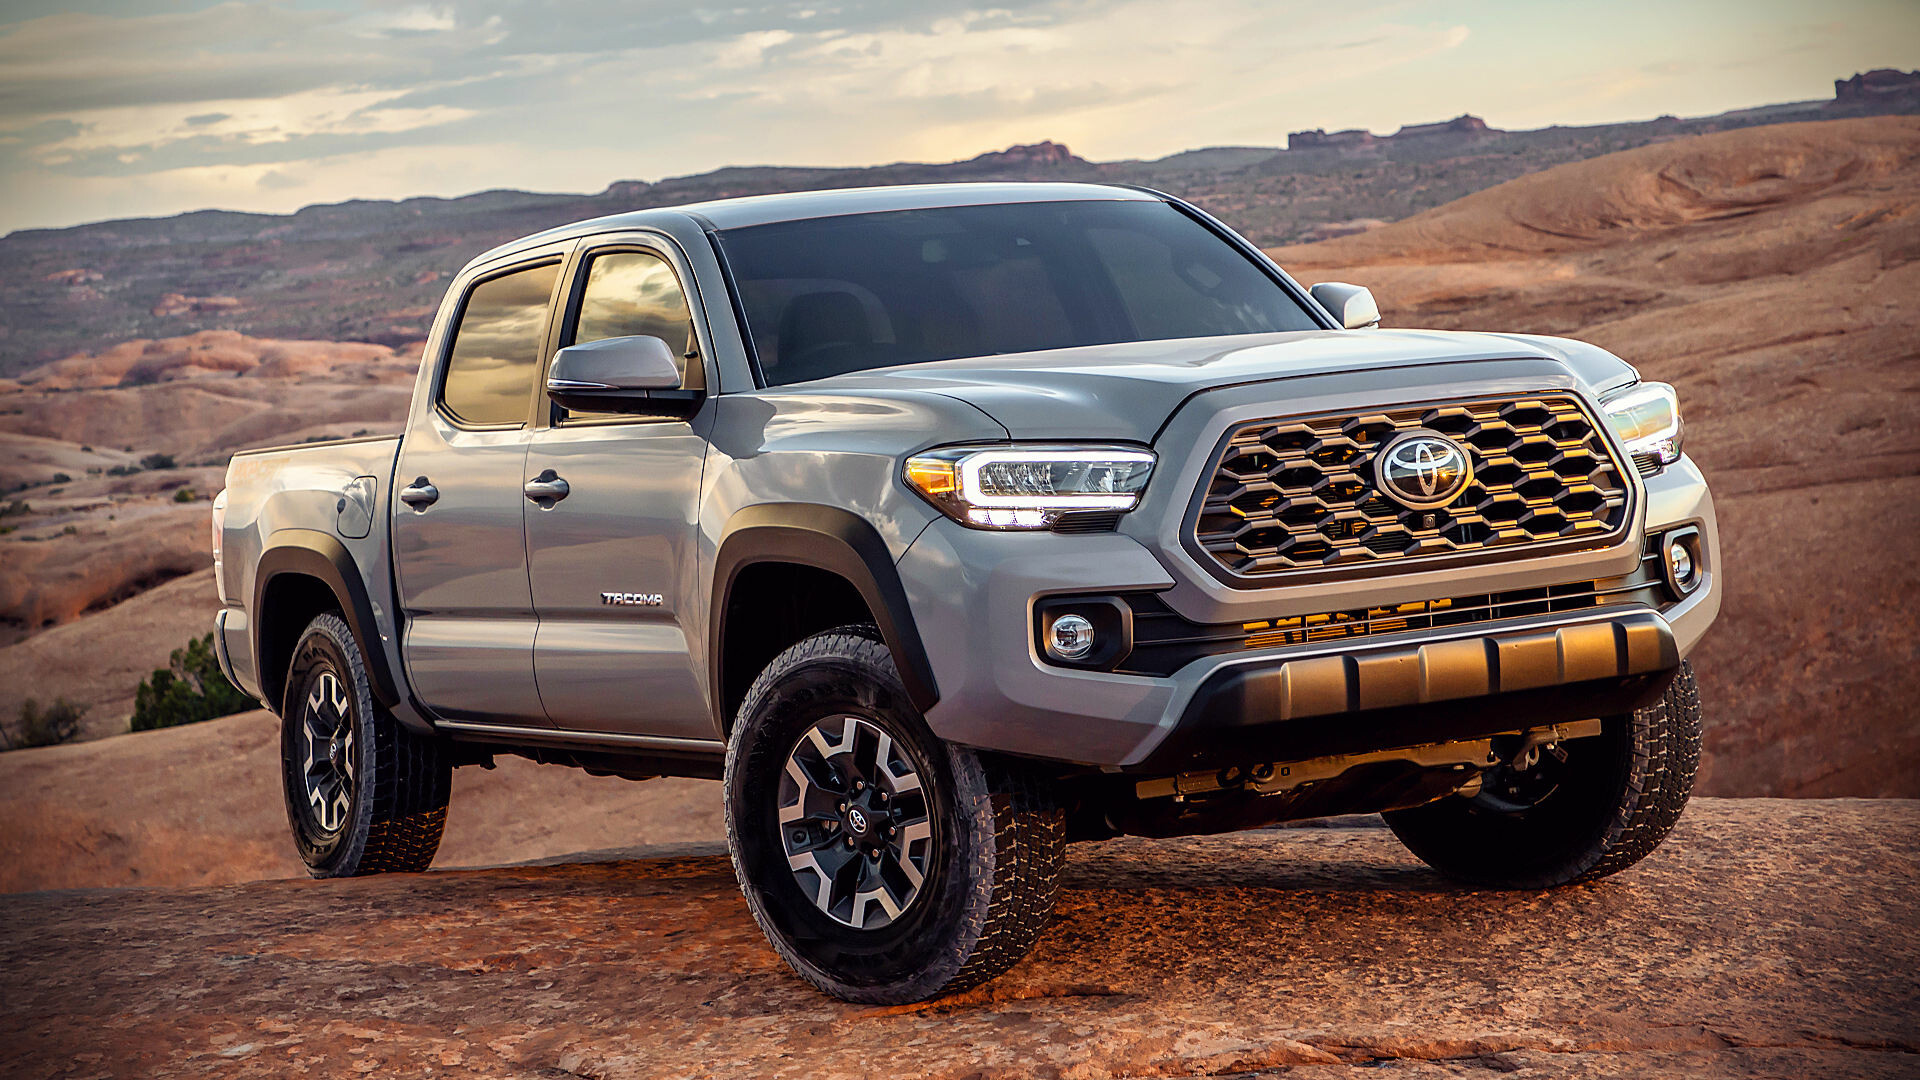 Toyota Tacoma: A TRD Pro version was introduced in late 2016 for the 2017 model year. 1920x1080 Full HD Background.